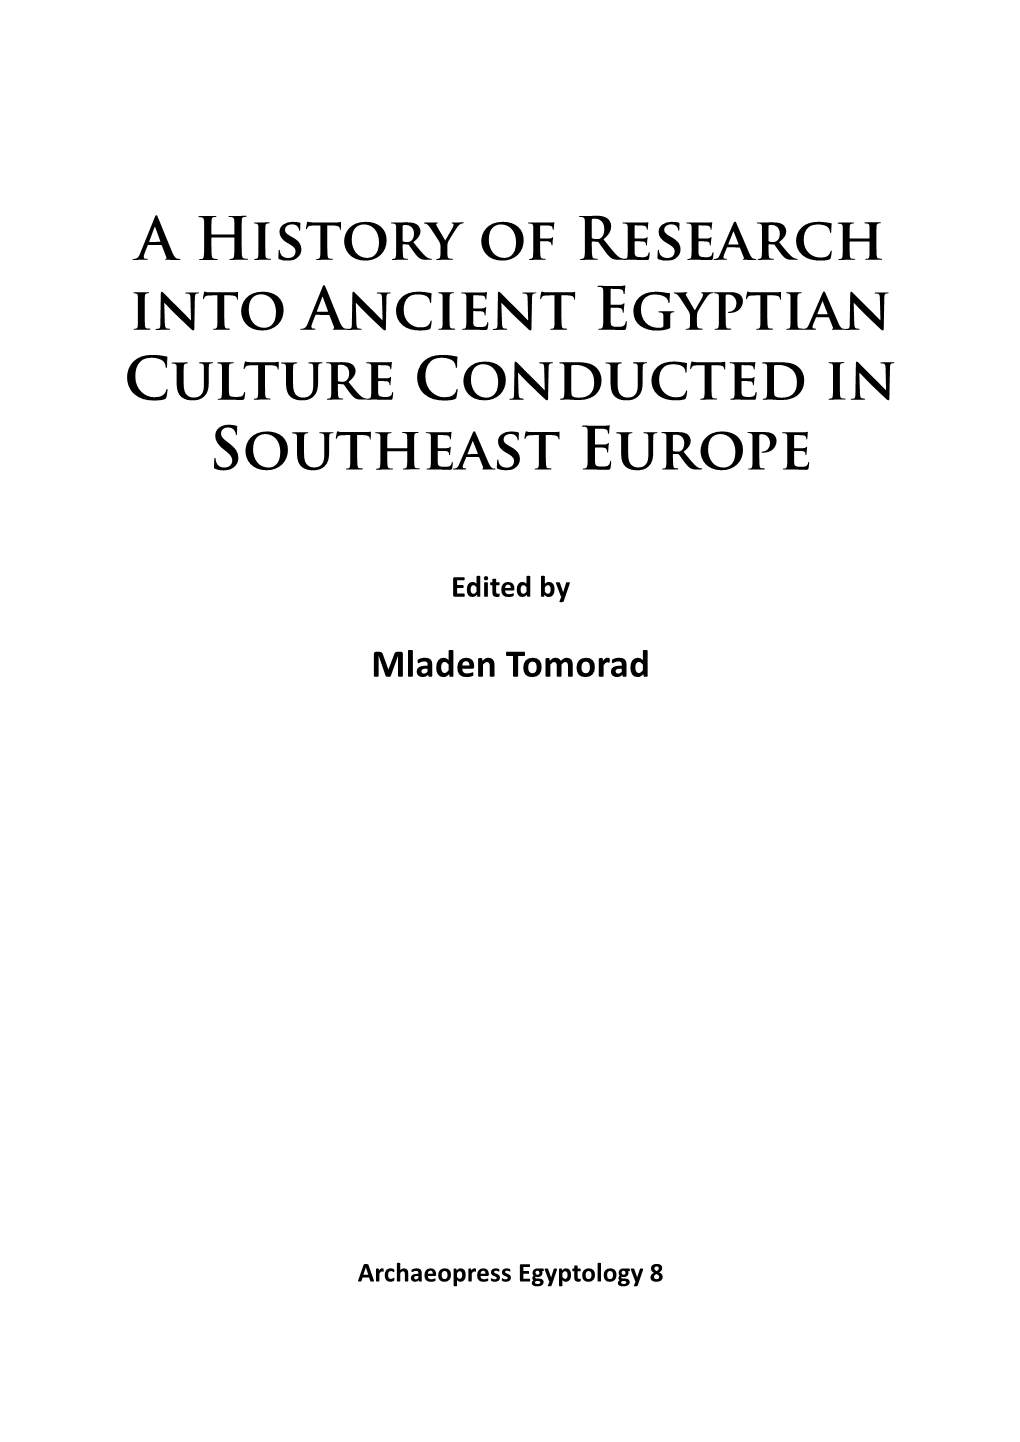 A History of Research Into Ancient Egyptian Culture Conducted in Southeast Europe